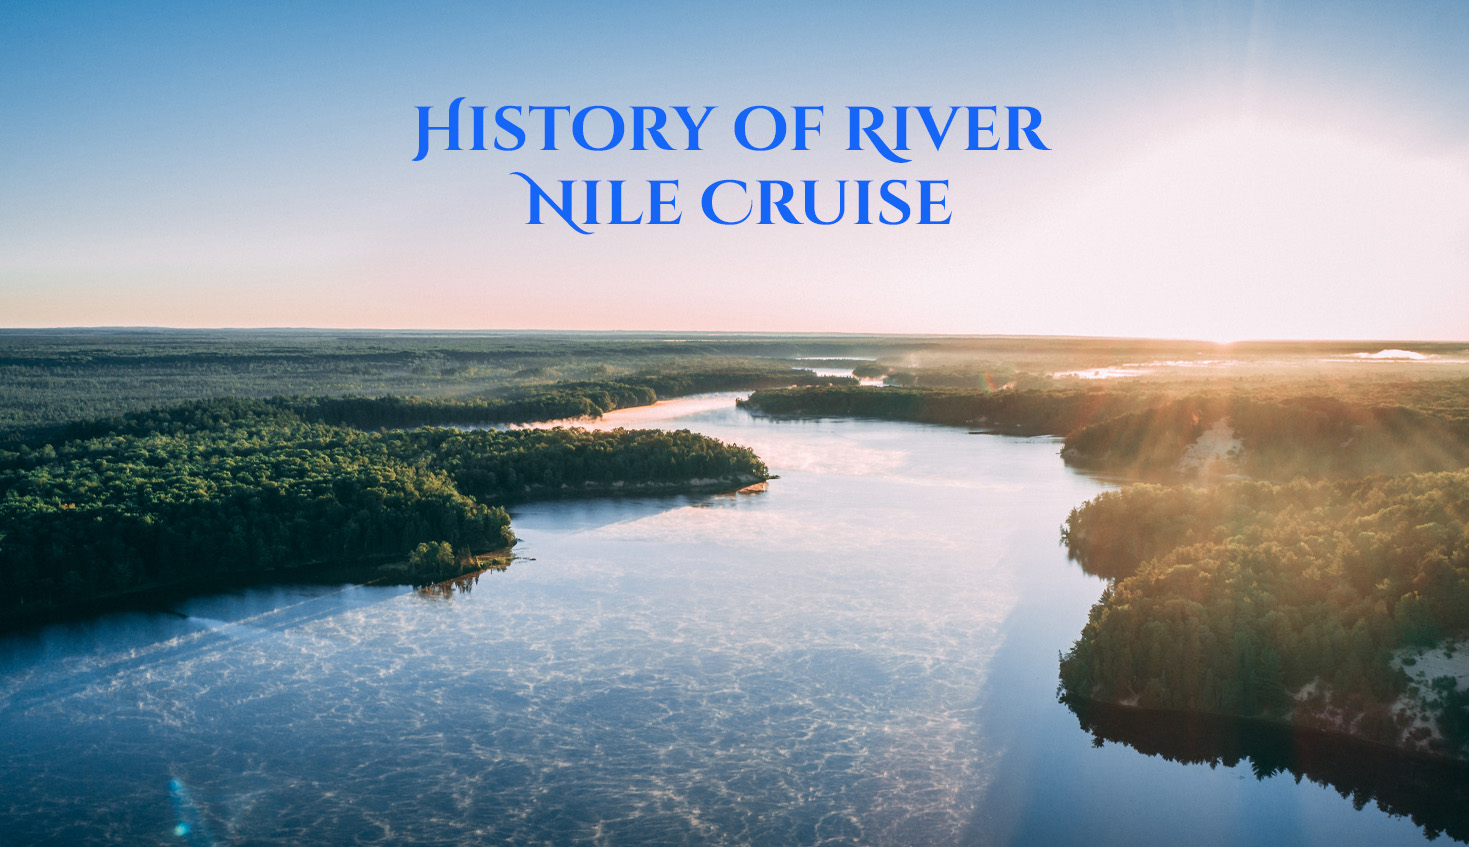 History of River Nile Cruise